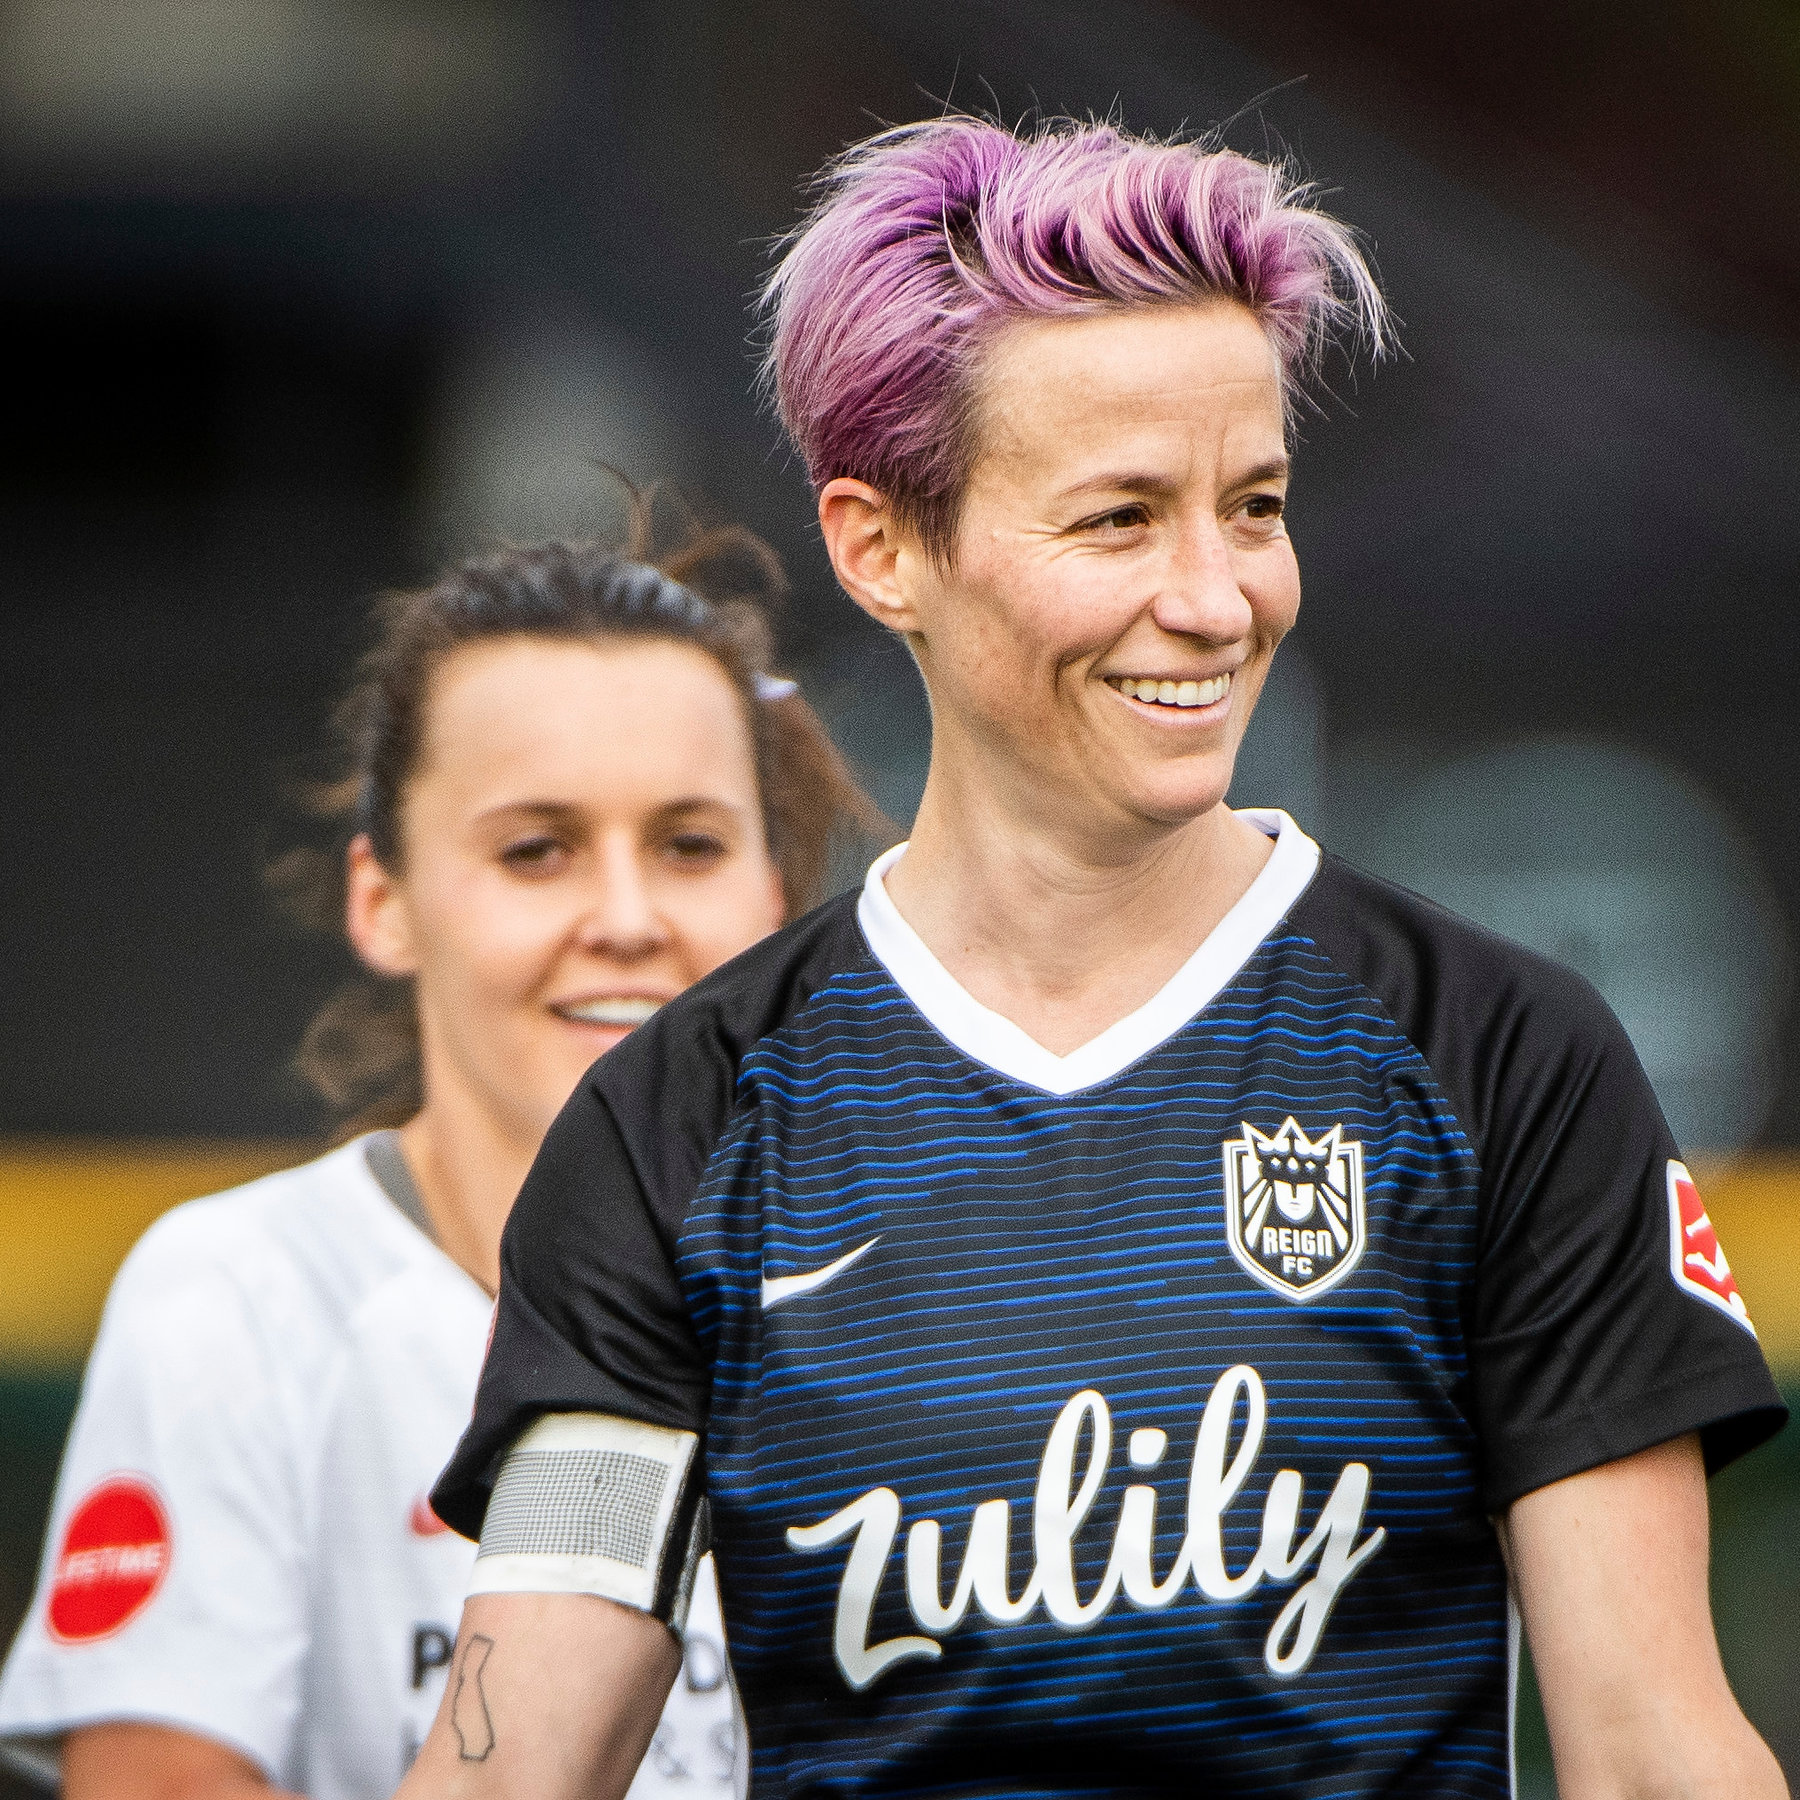 In which year did Megan Rapinoe make her international debut for the United States?